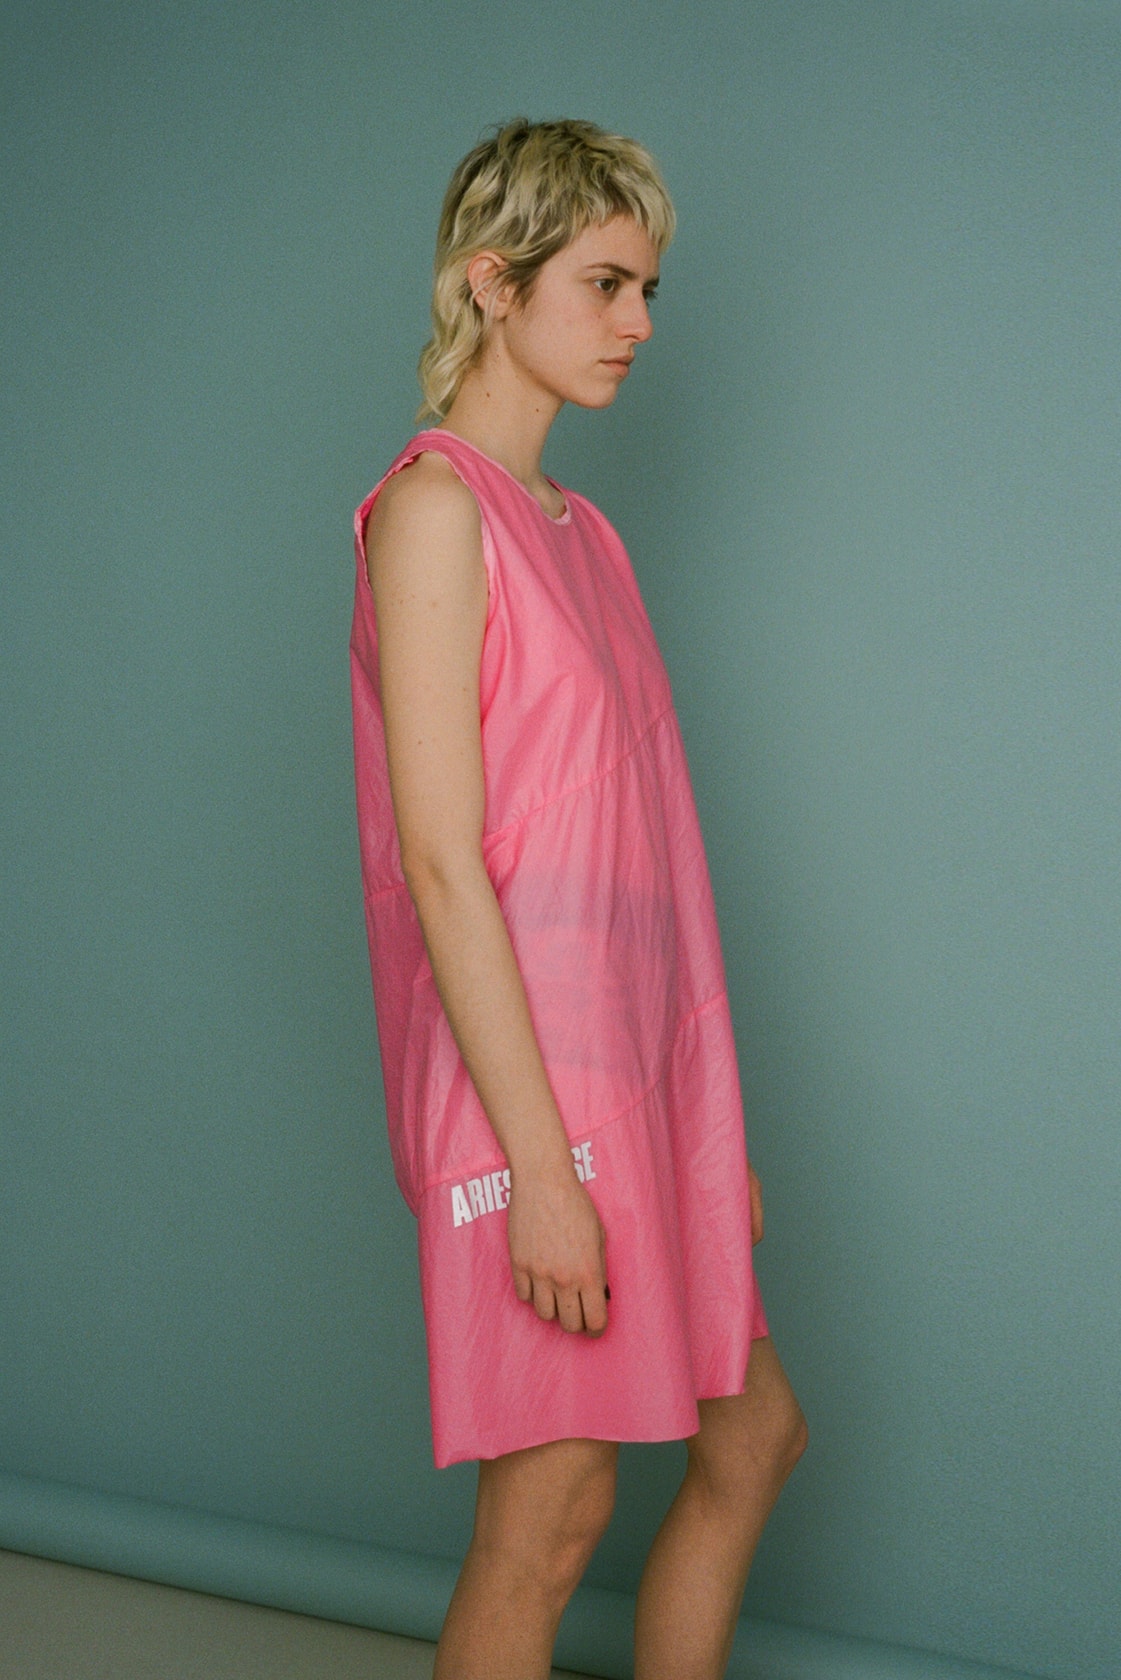 aries fall/winter 2019 collection pink dress